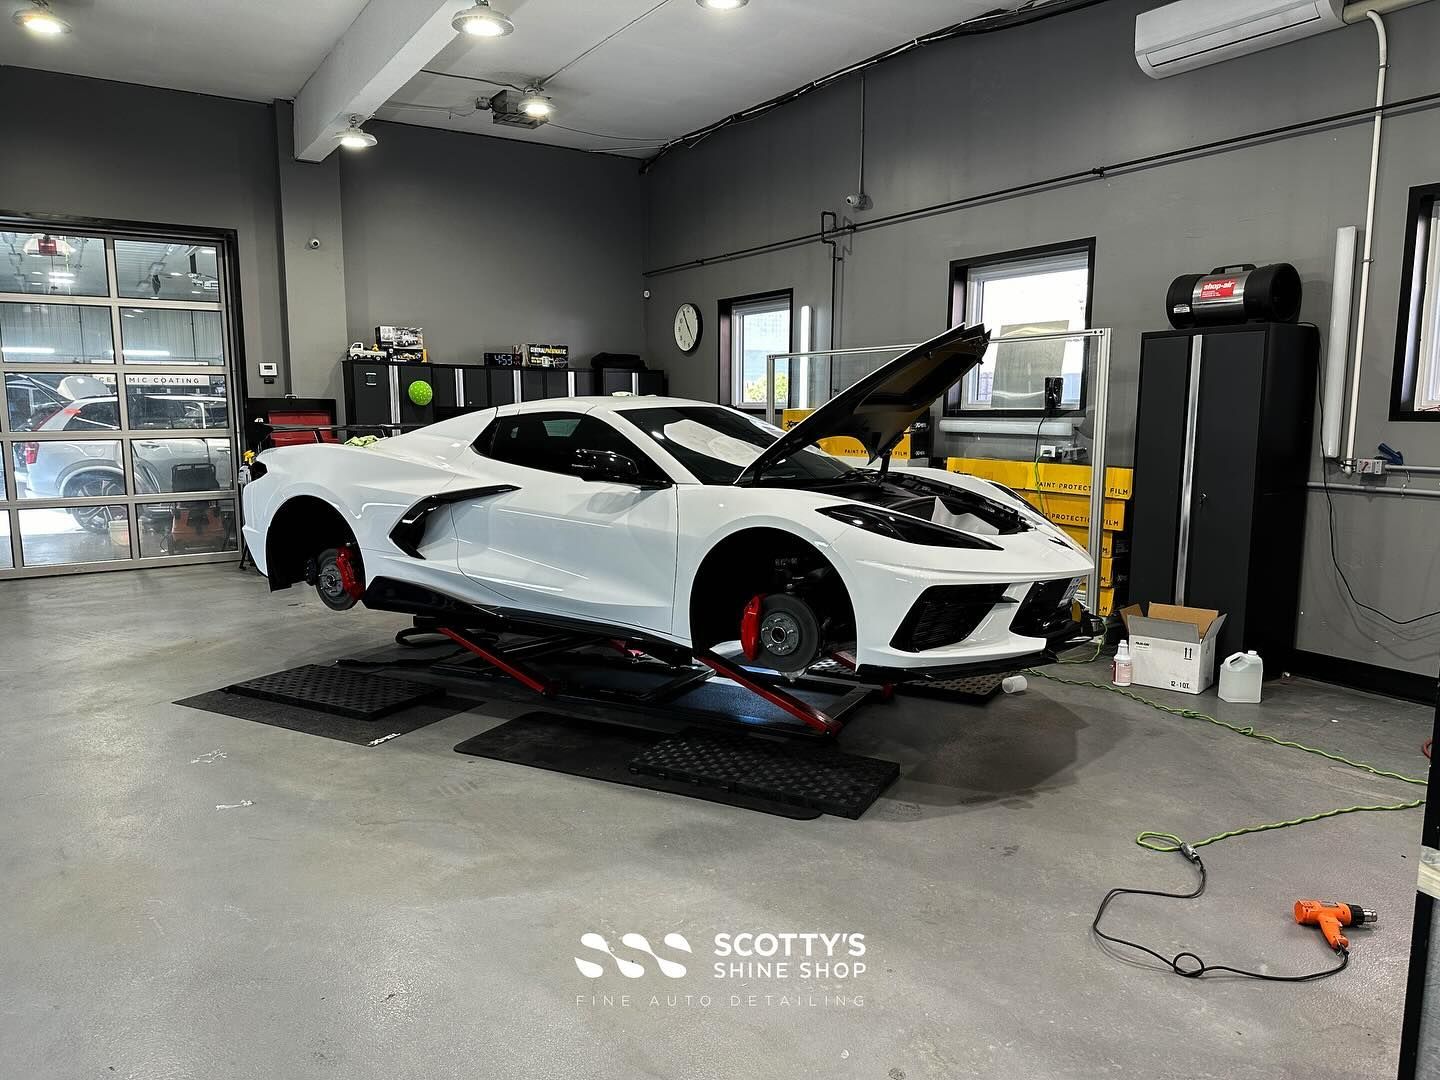 2024 Chevrolet Corvette C8 Full Coverage in Paint Protection Film, Xpel Prime XR Plus Ceramic Window Tint, Ceramic Coating & Colour Change Powder Coated Wheels & Roof Panels hood up side view London, Canada